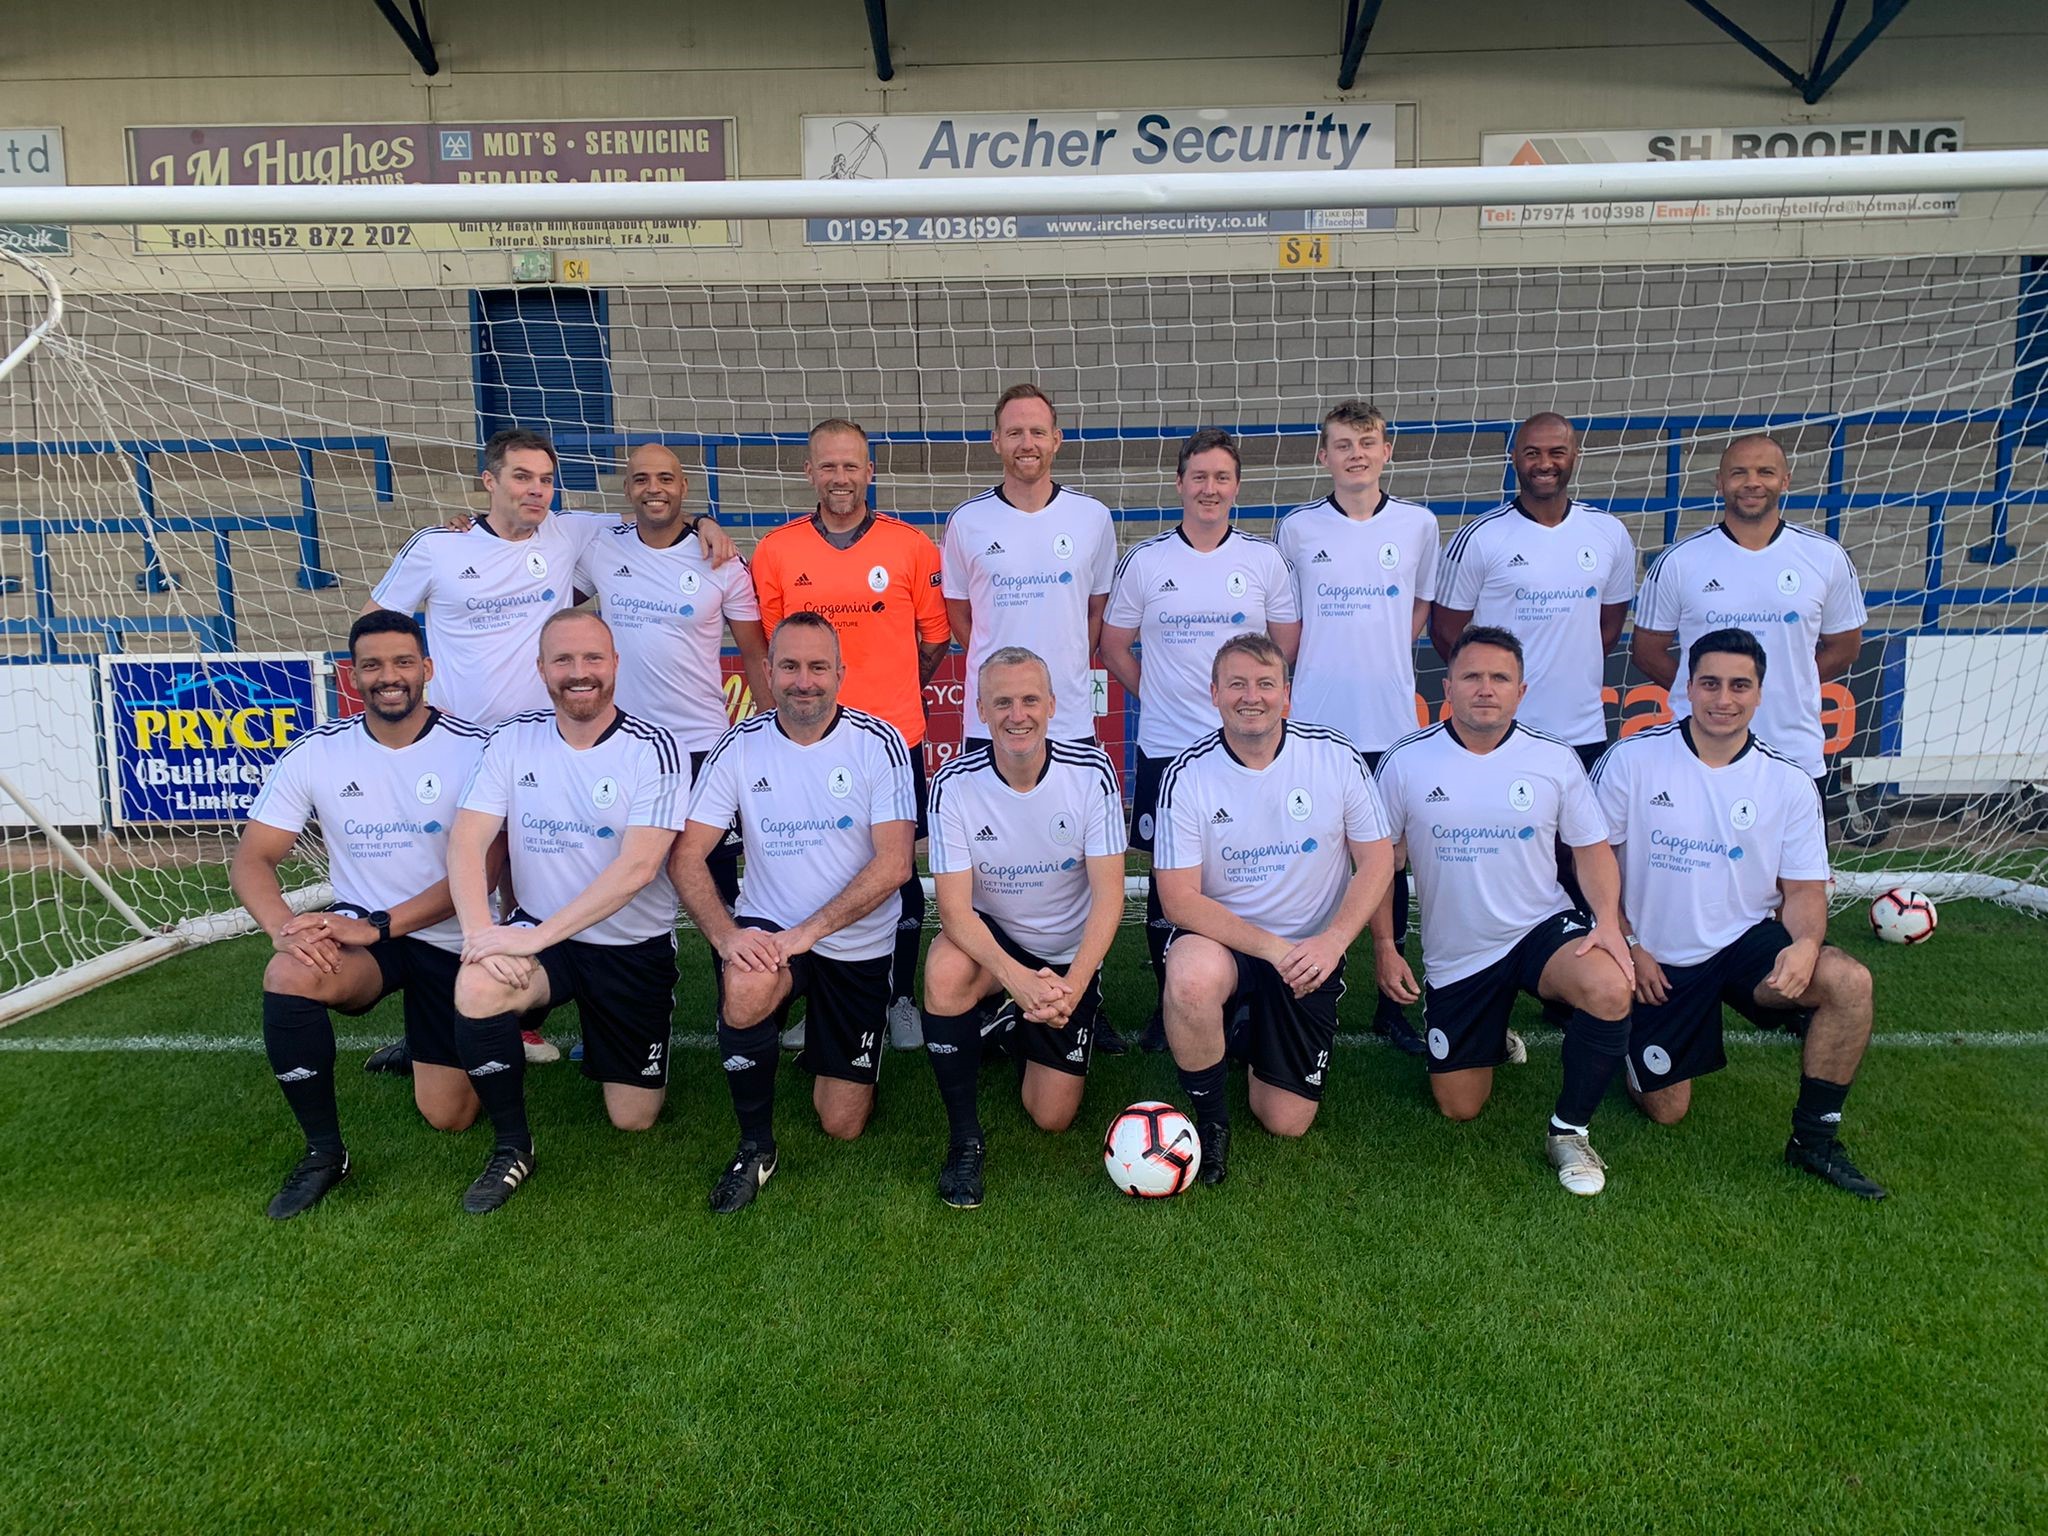 Telford Old Boys Charity Fixture